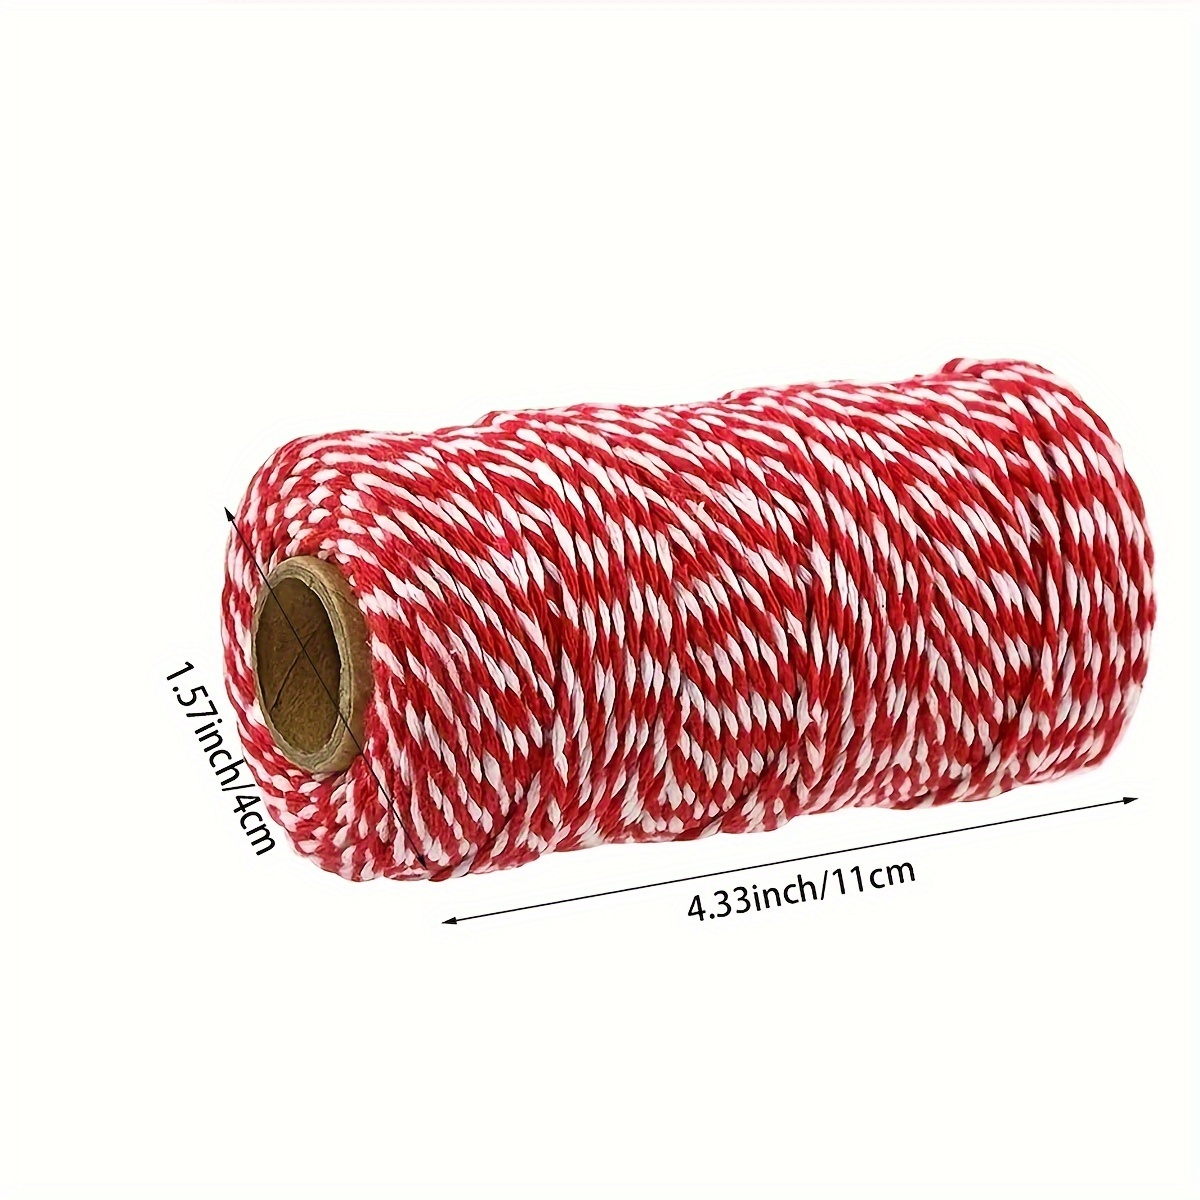 Long Red And White Gift Twine Cotton Baking Twine Craft Twine